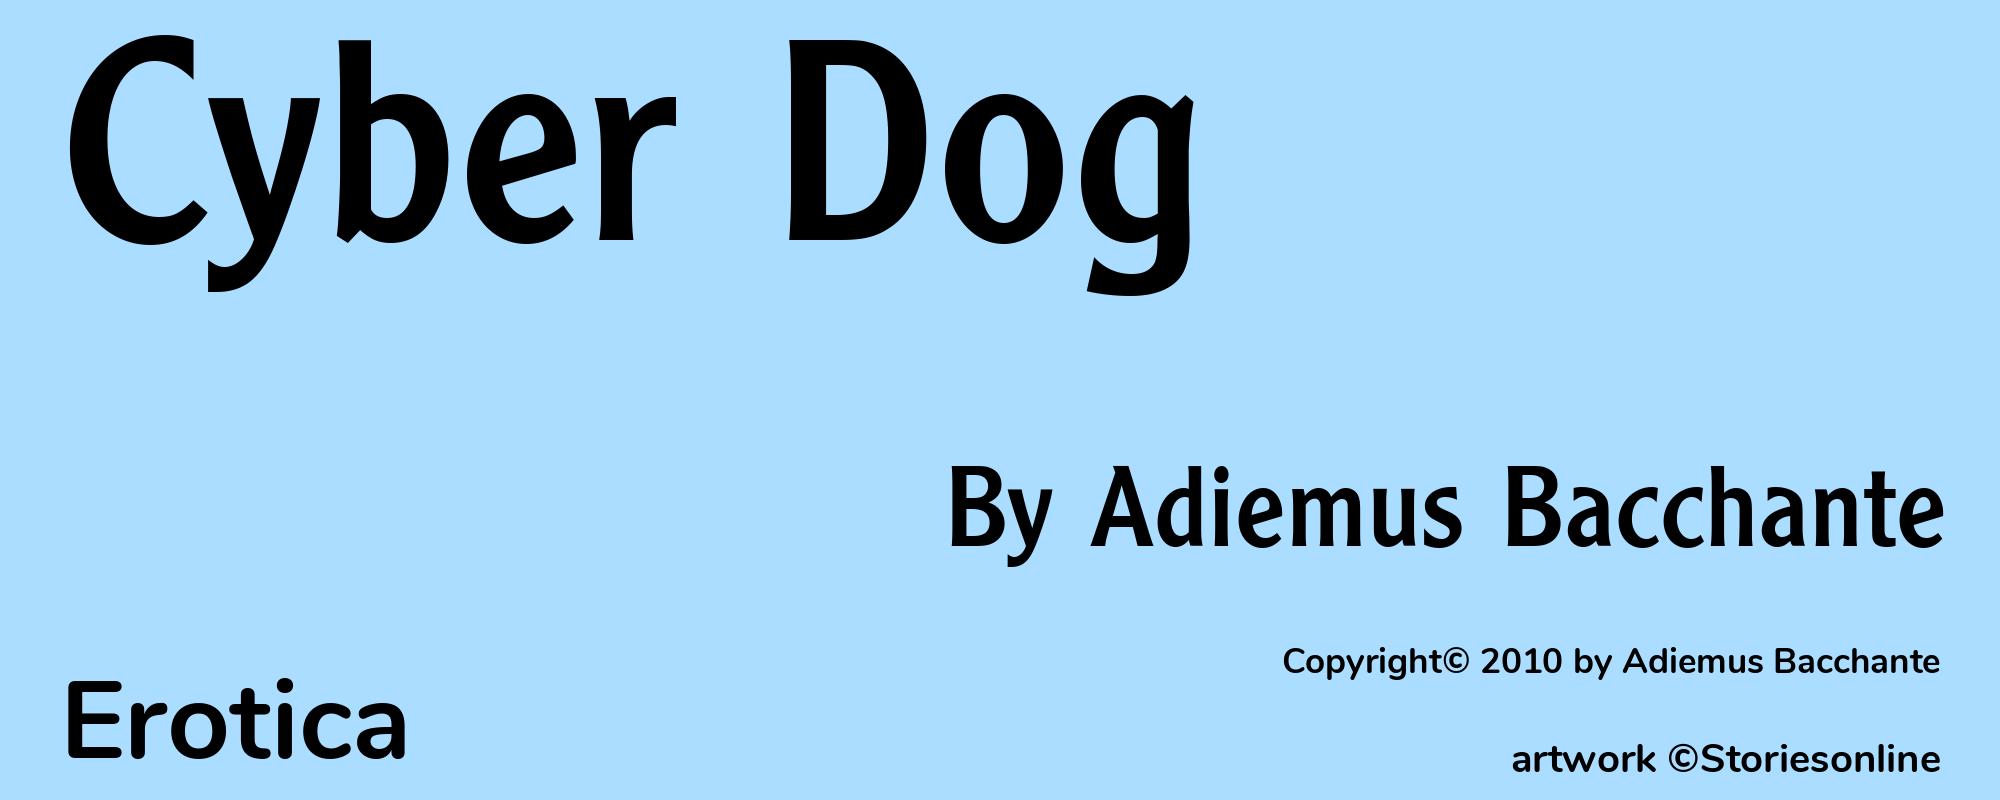 Cyber Dog - Cover